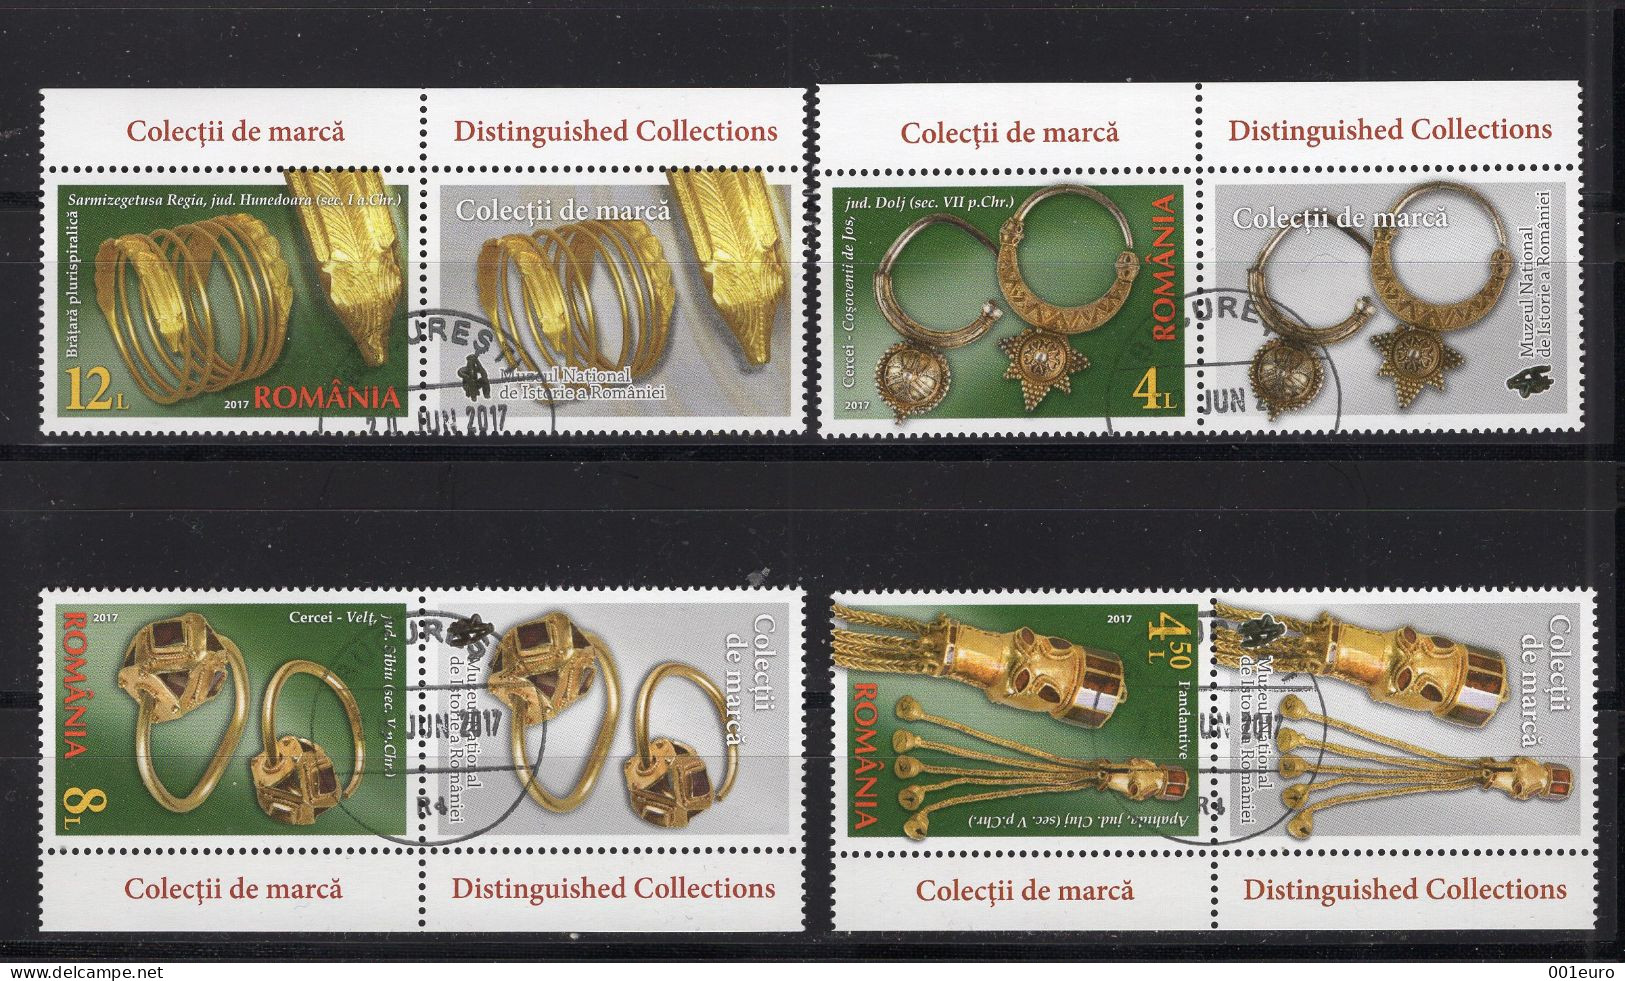 ROMANIA 2017: DISTINGUISHED COLLECTIONS, Set Of 4 Used Stamps + Vignettes - Registered Shipping! - Gebruikt